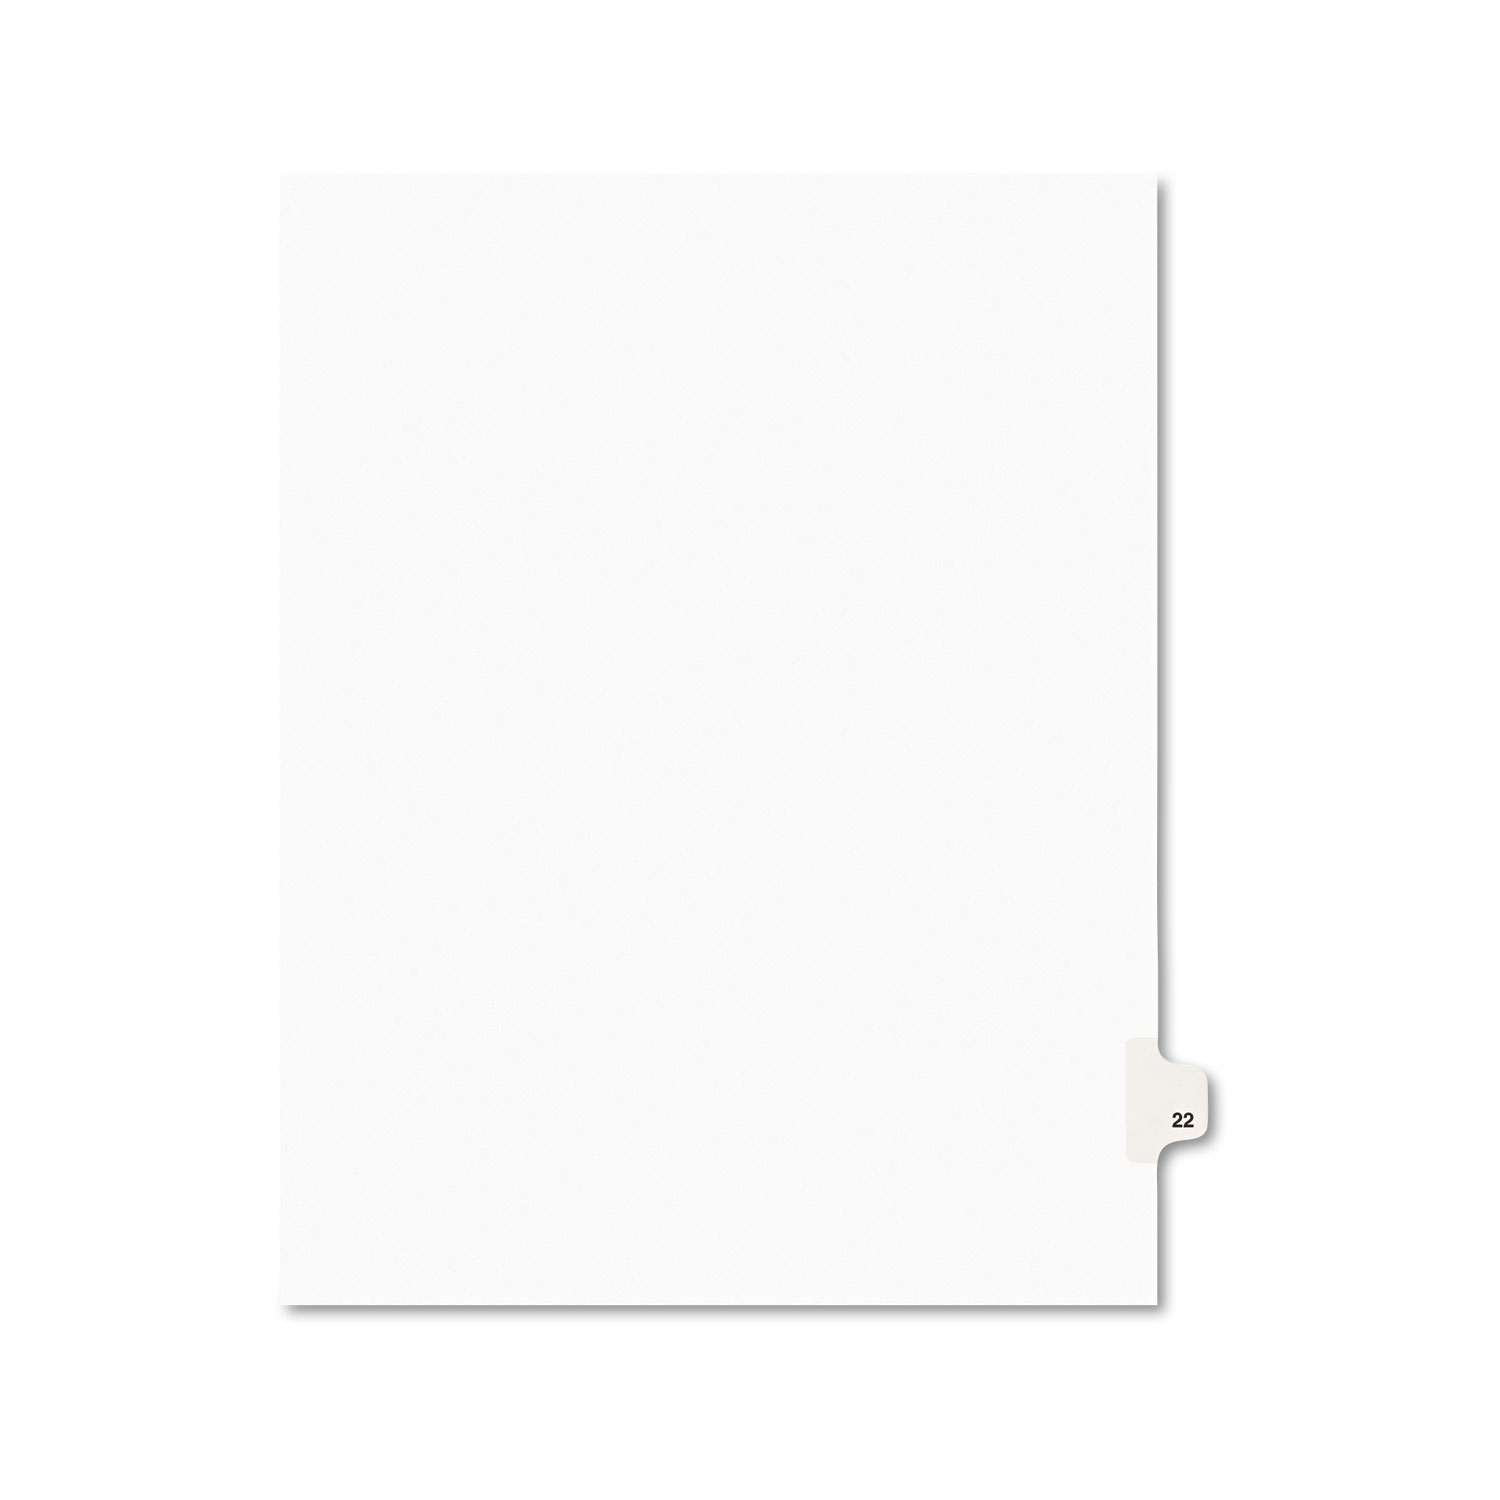  Avery 01022 Preprinted Legal Exhibit Side Tab Index Dividers, Avery Style, 10-Tab, 22, 11 x 8.5, White, 25/Pack (AVE01022) 